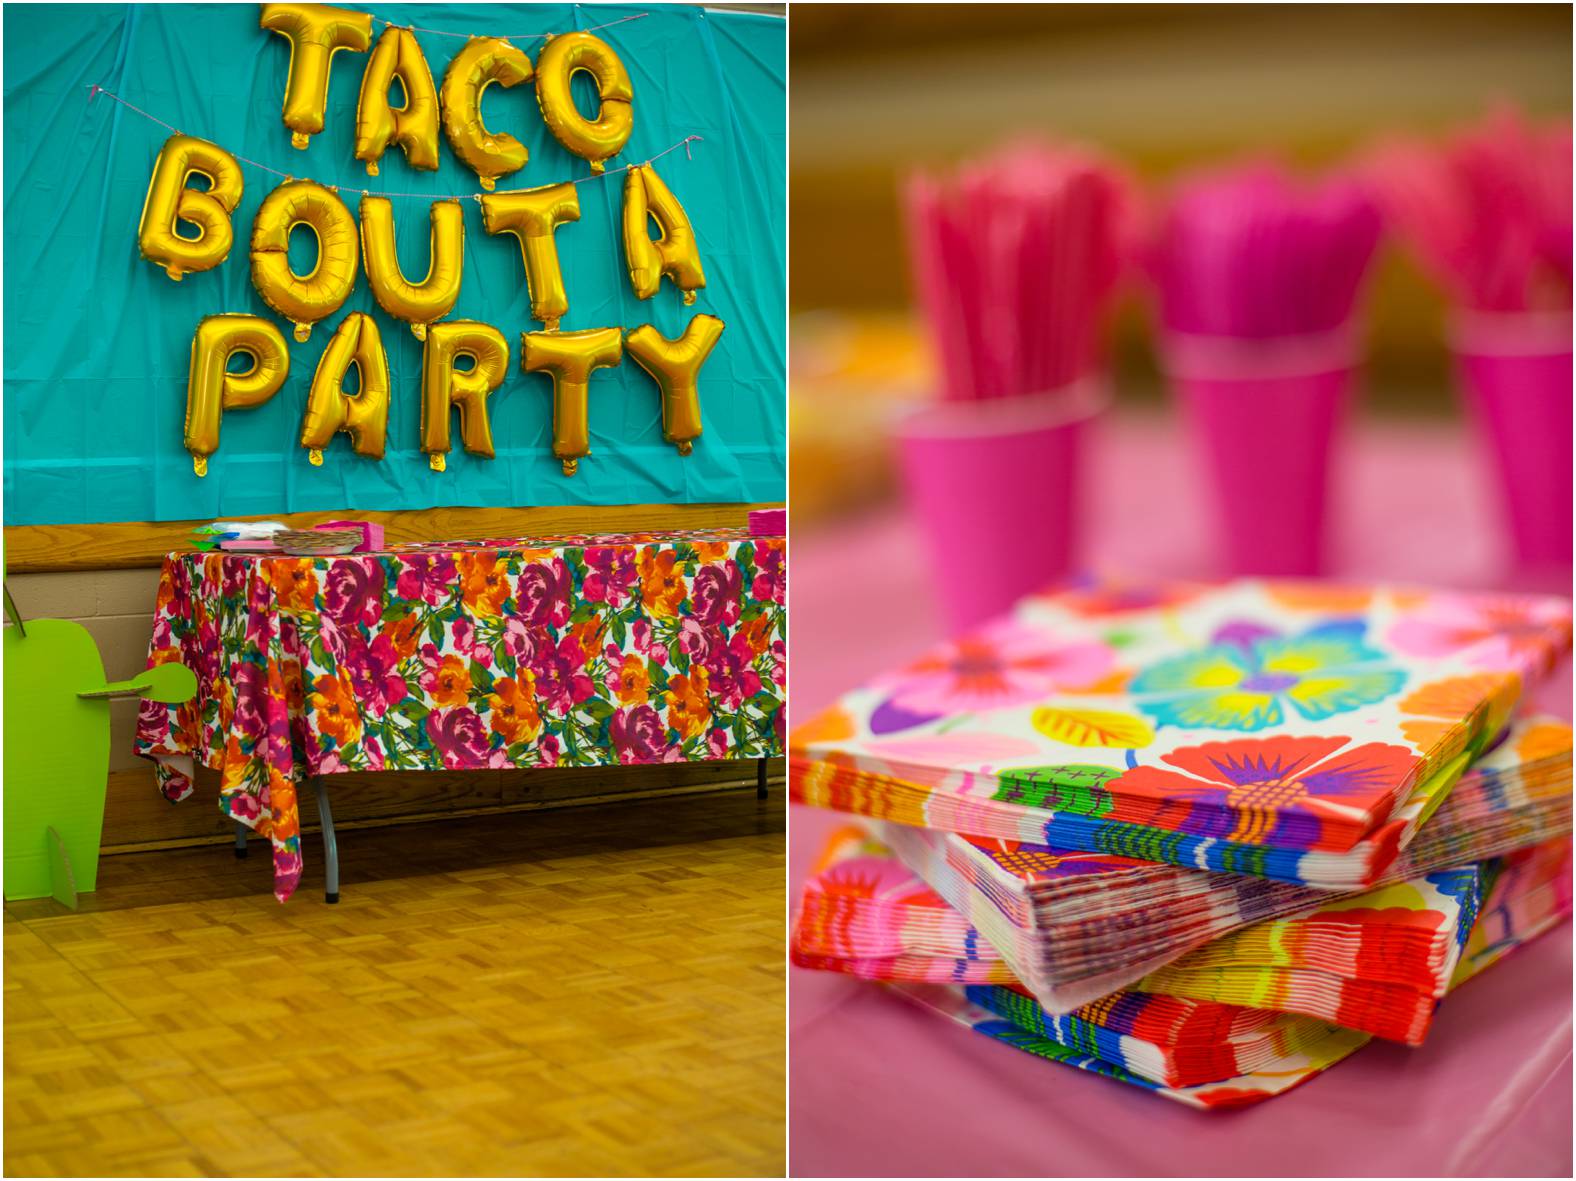 Taco bout a party custom balloons